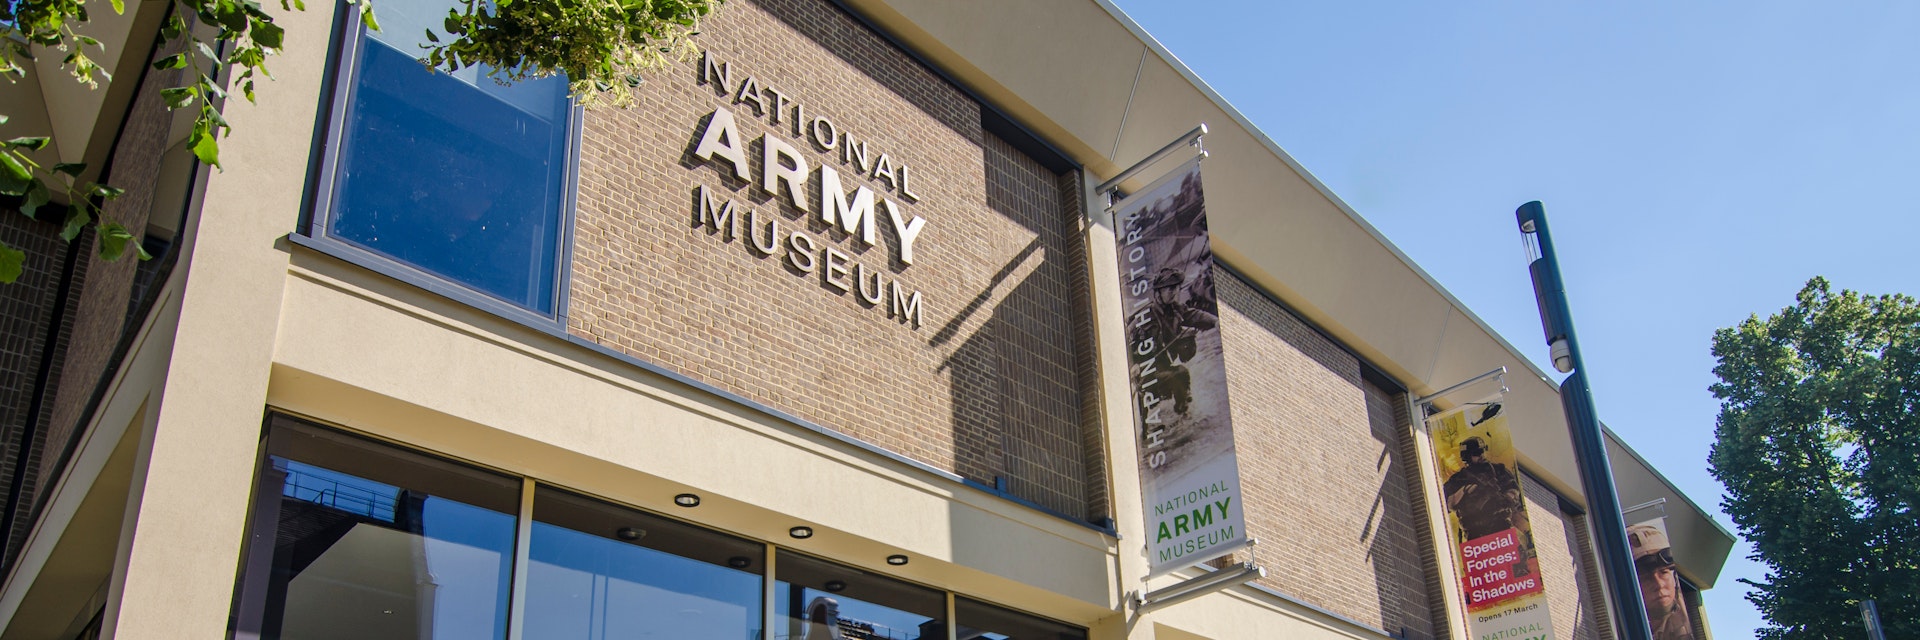 The National Army Museum in Chelsea, the British Army's central museum.